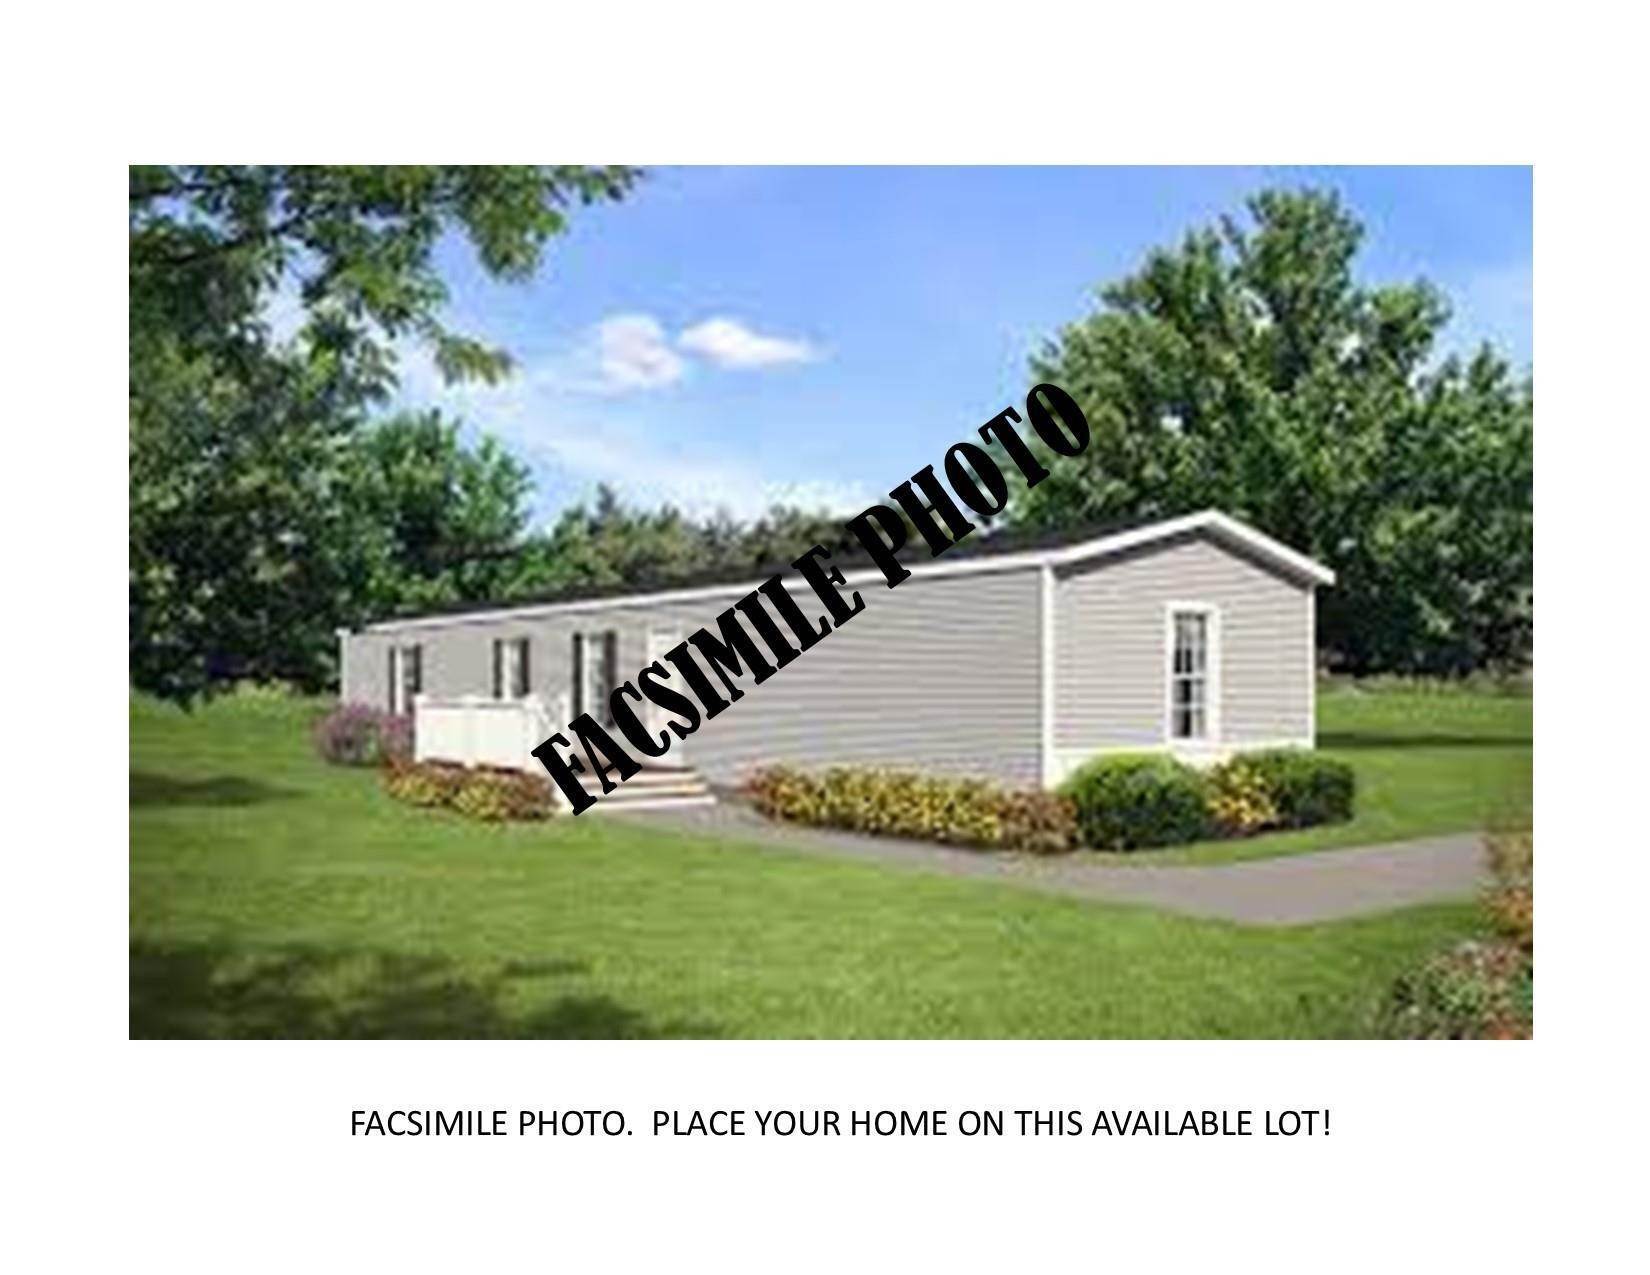 Property at Hinsdale, NH 03451